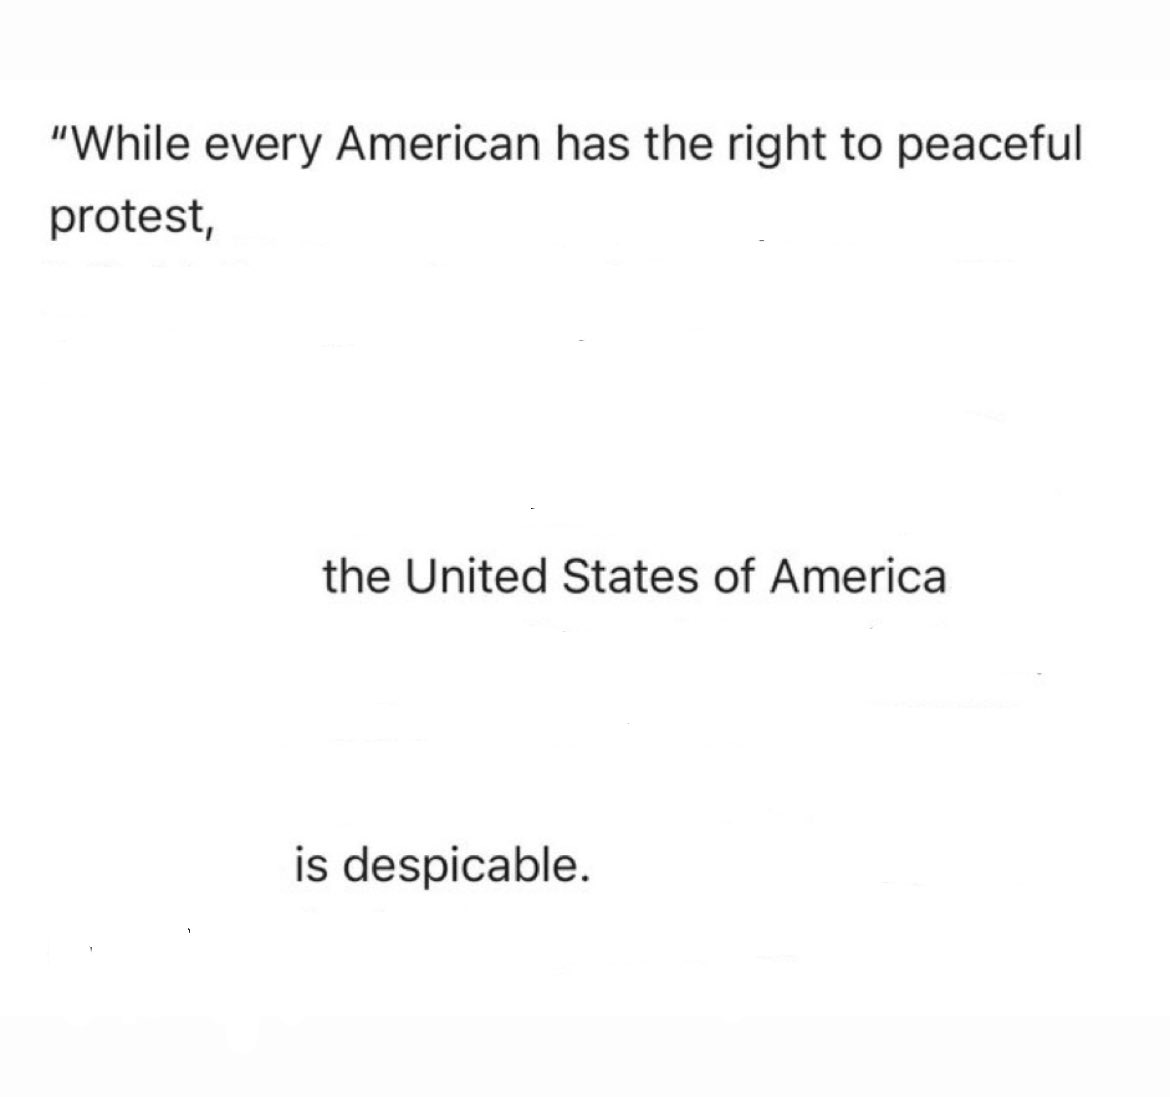 wow, surprising statement from the White House on the protests at Columbia University against the genocide in Palestine!